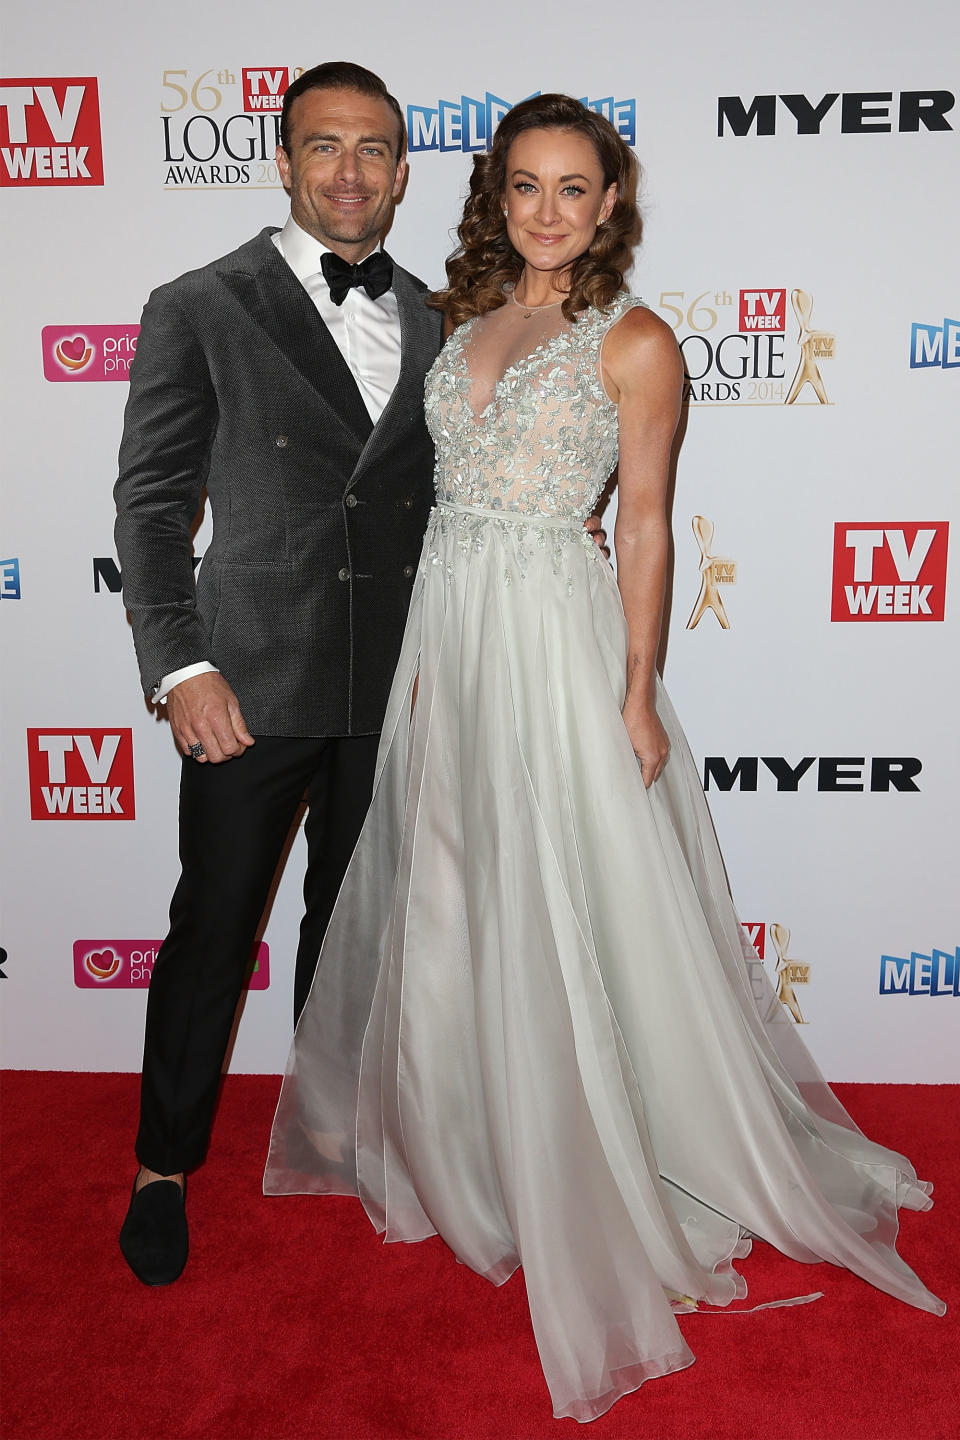 Michelle and Commando at the 2014 Logie Awards